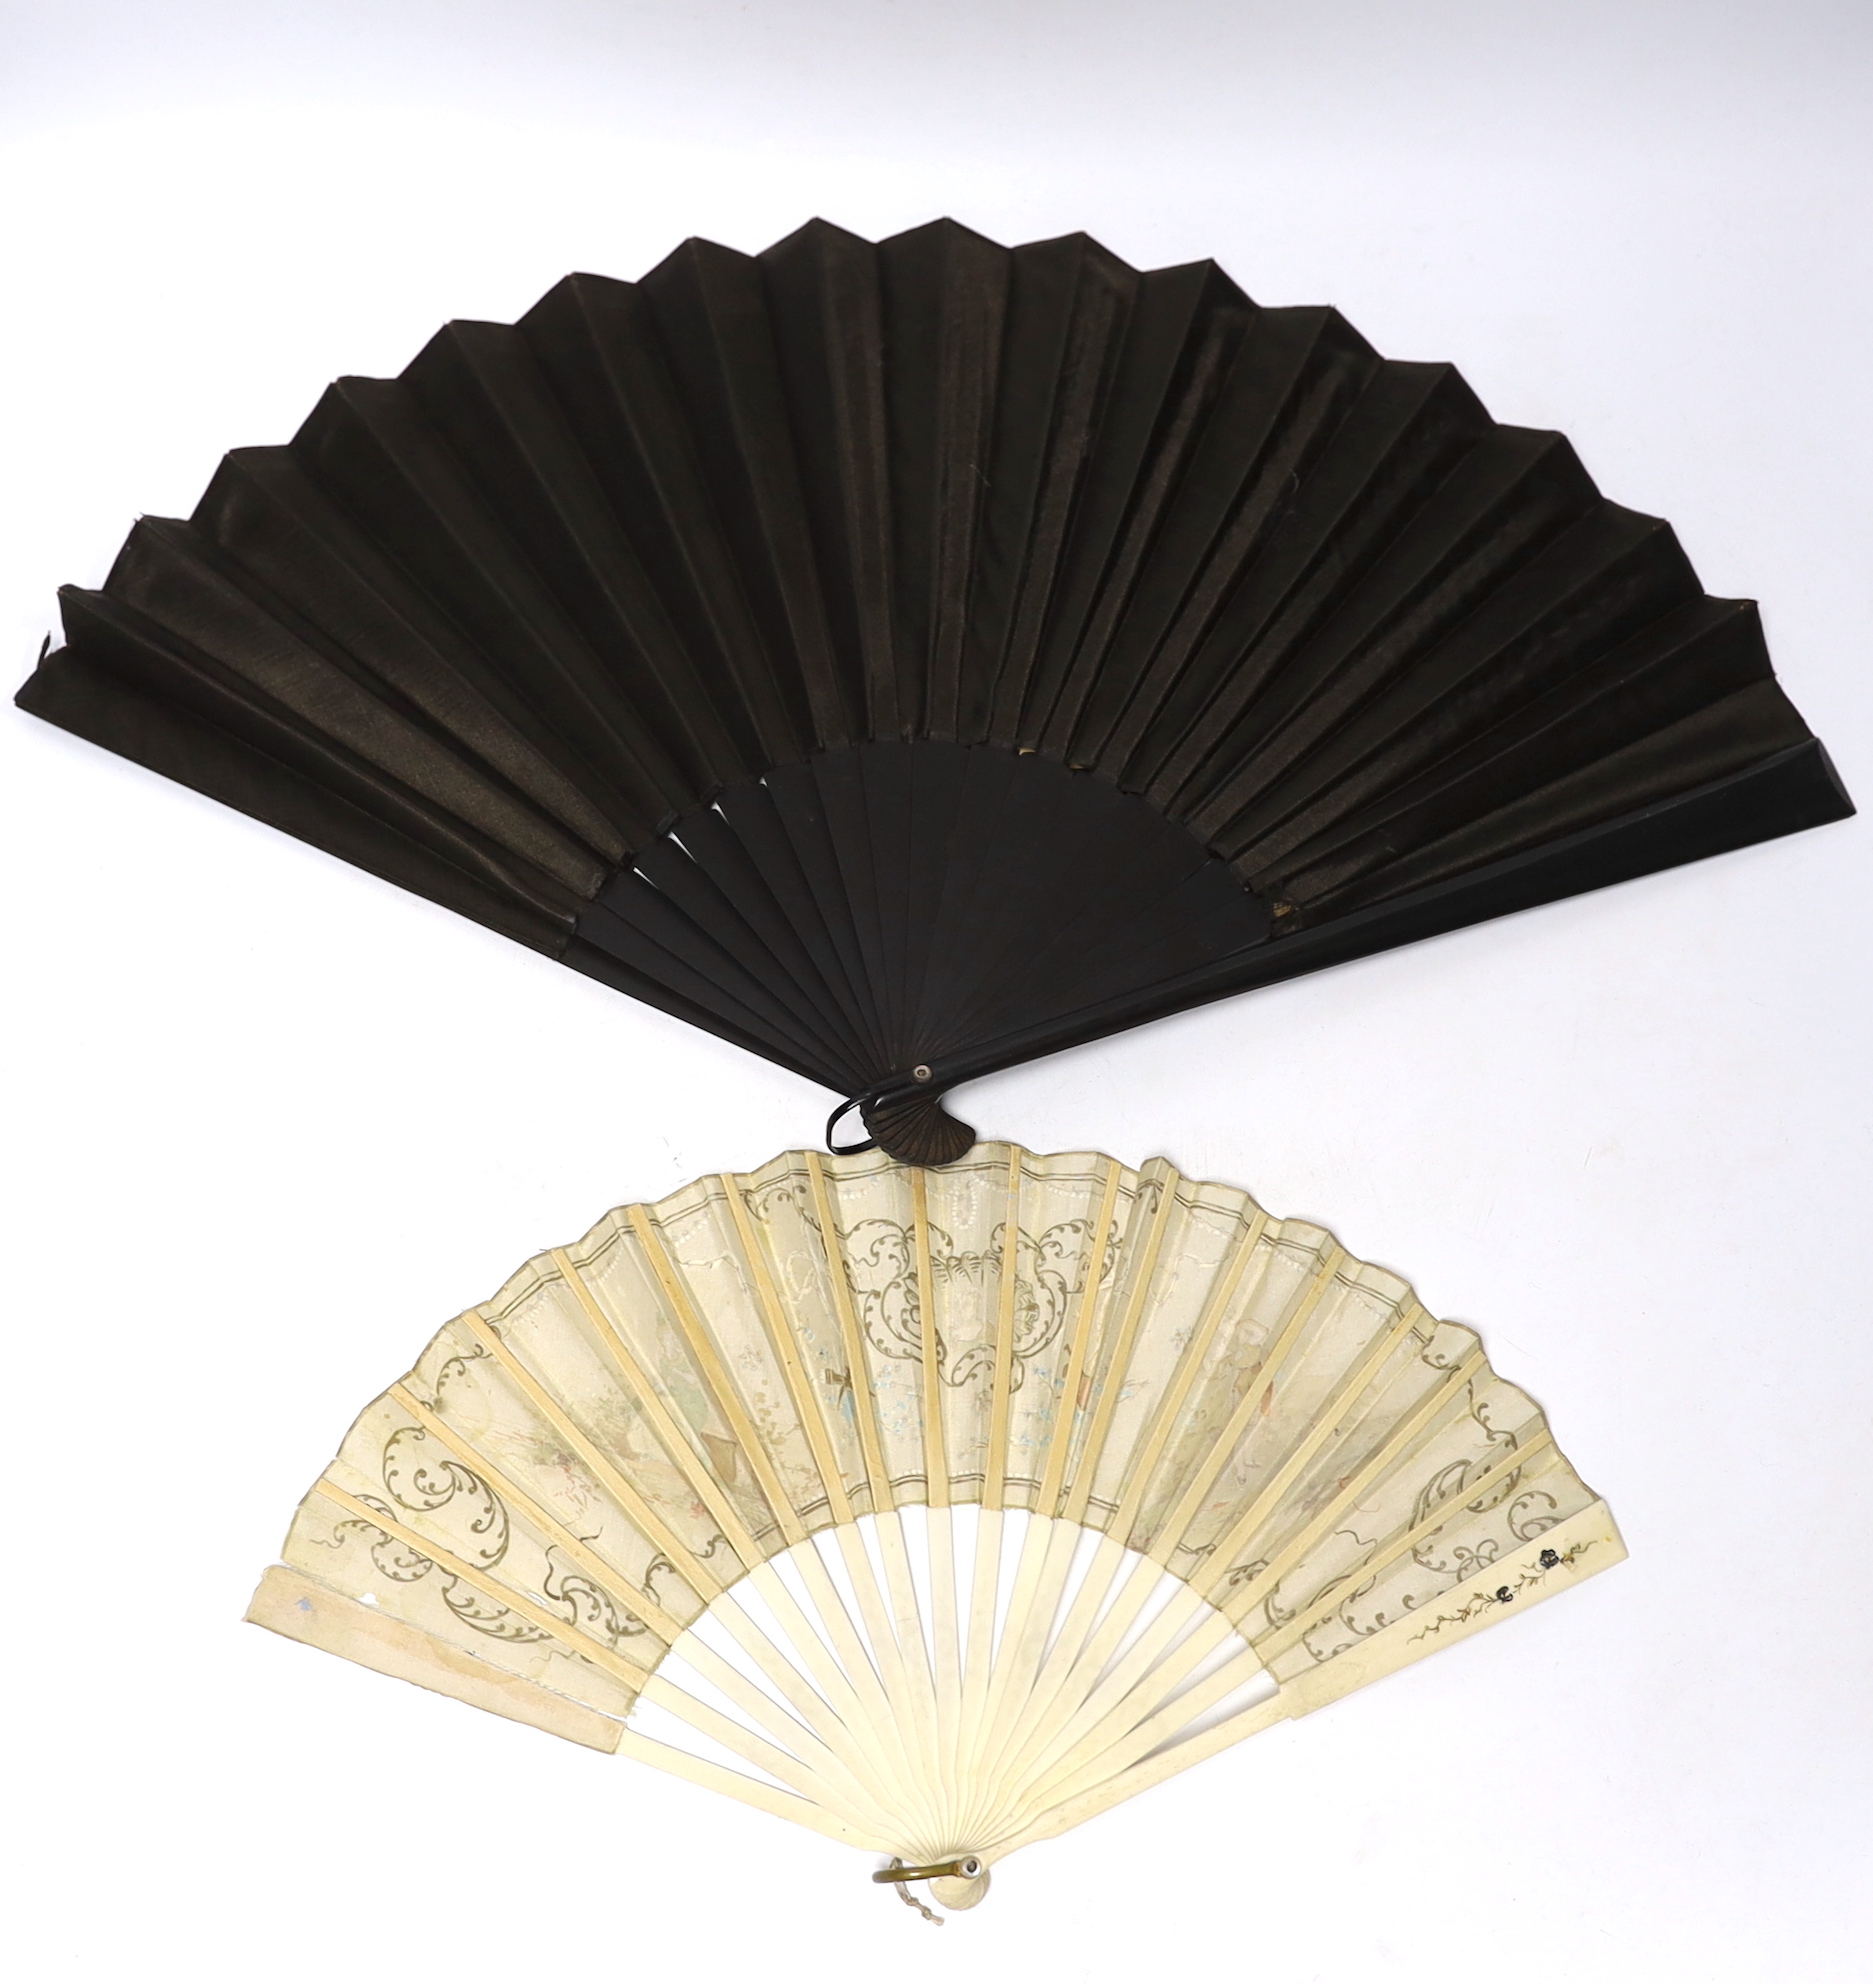 A French 19th century bone and sequin fan and a Spanish figurative leaf fan with ebony guards